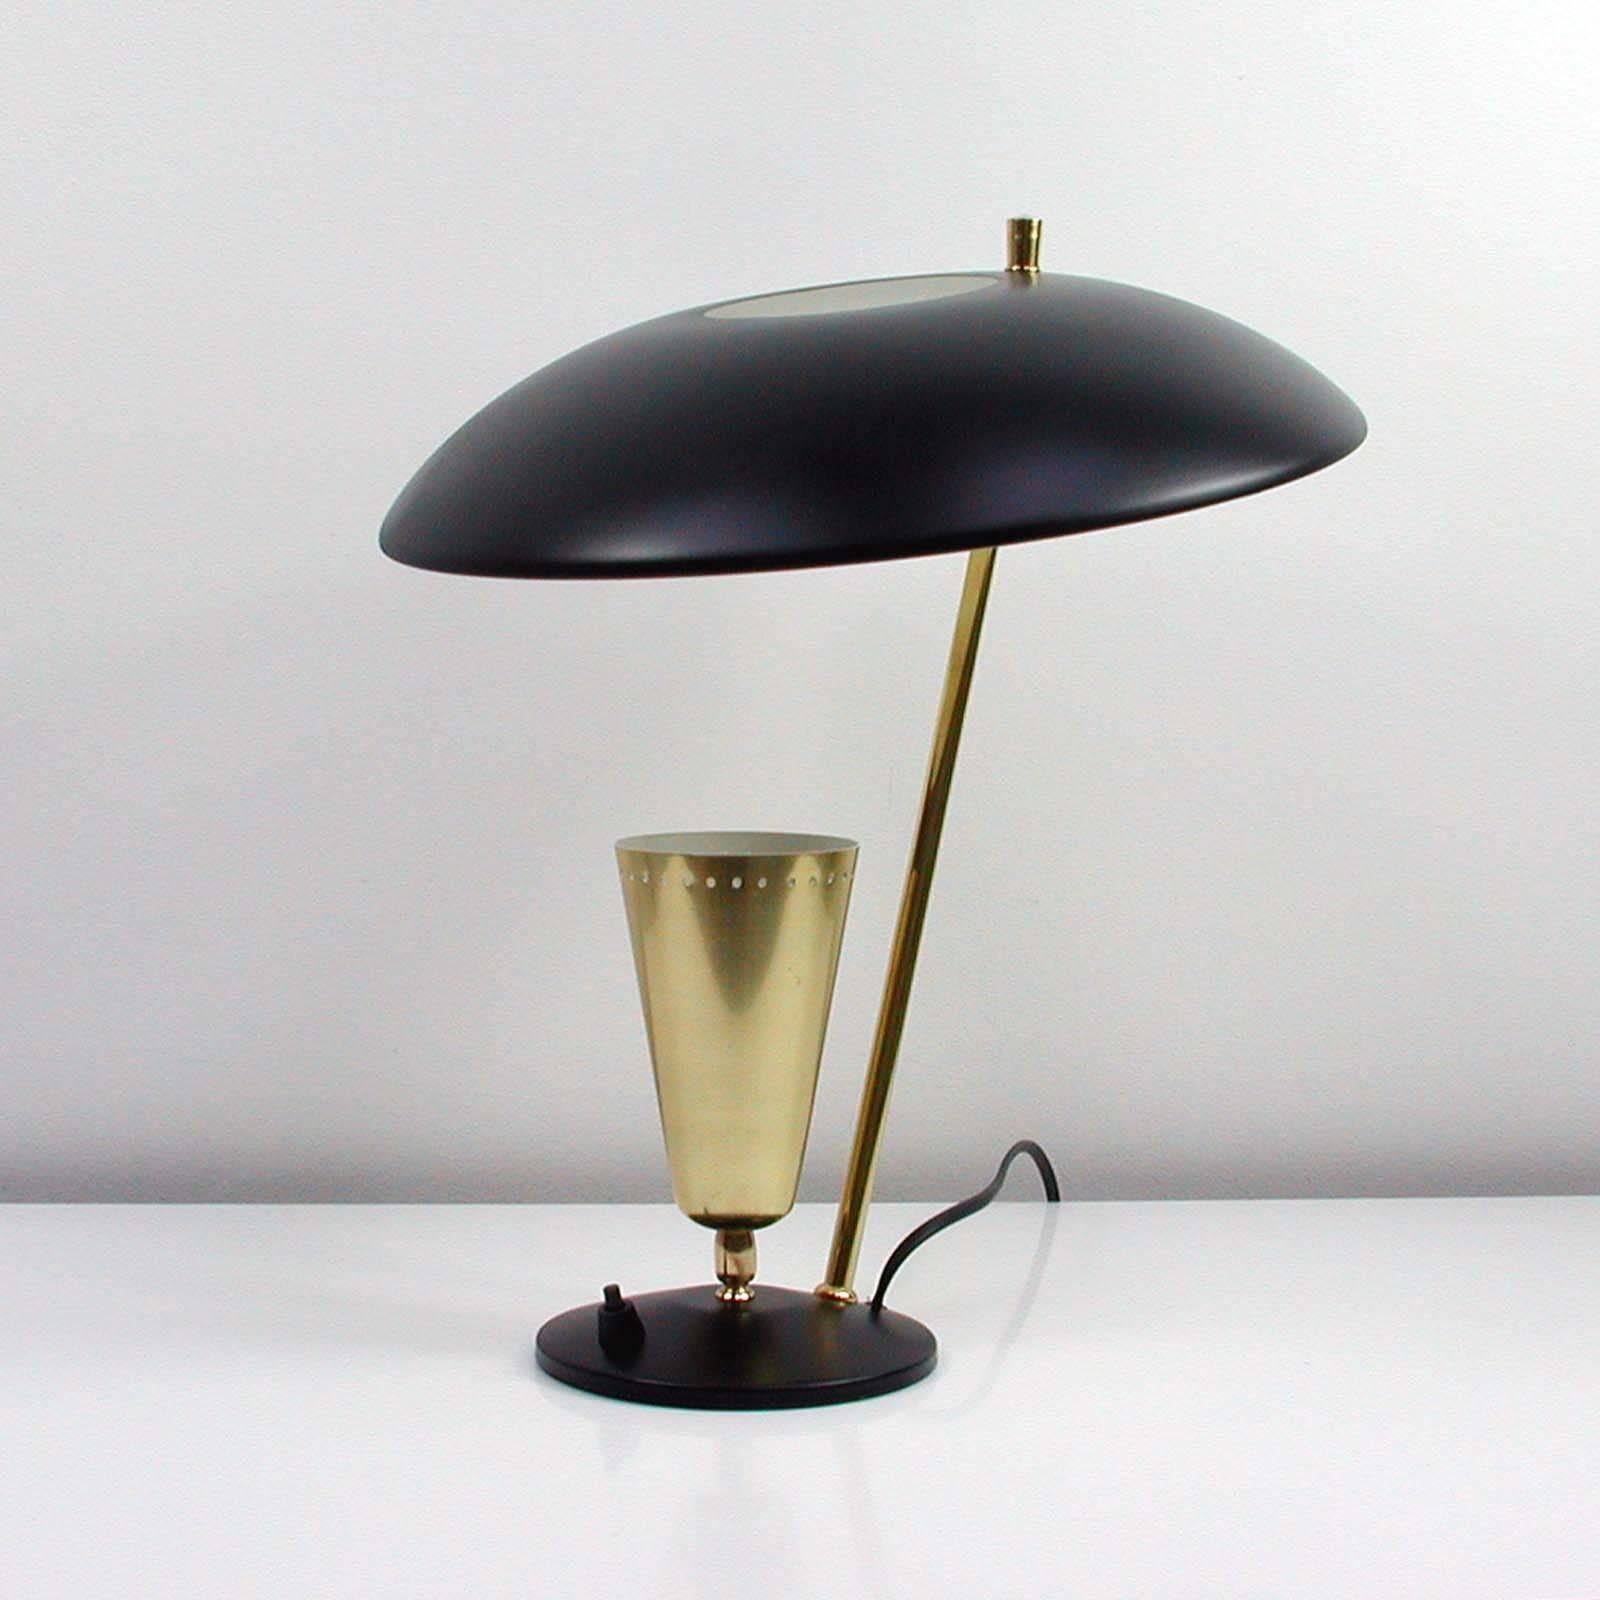 This vintage reflecting midcentury table lamp was produced in France in the 1950s and manufactured by Aluminor, nice.

The lamp has got an adjustable black lacquered reflecting top lampshade and an adjustable conical brass lampshade on the base.